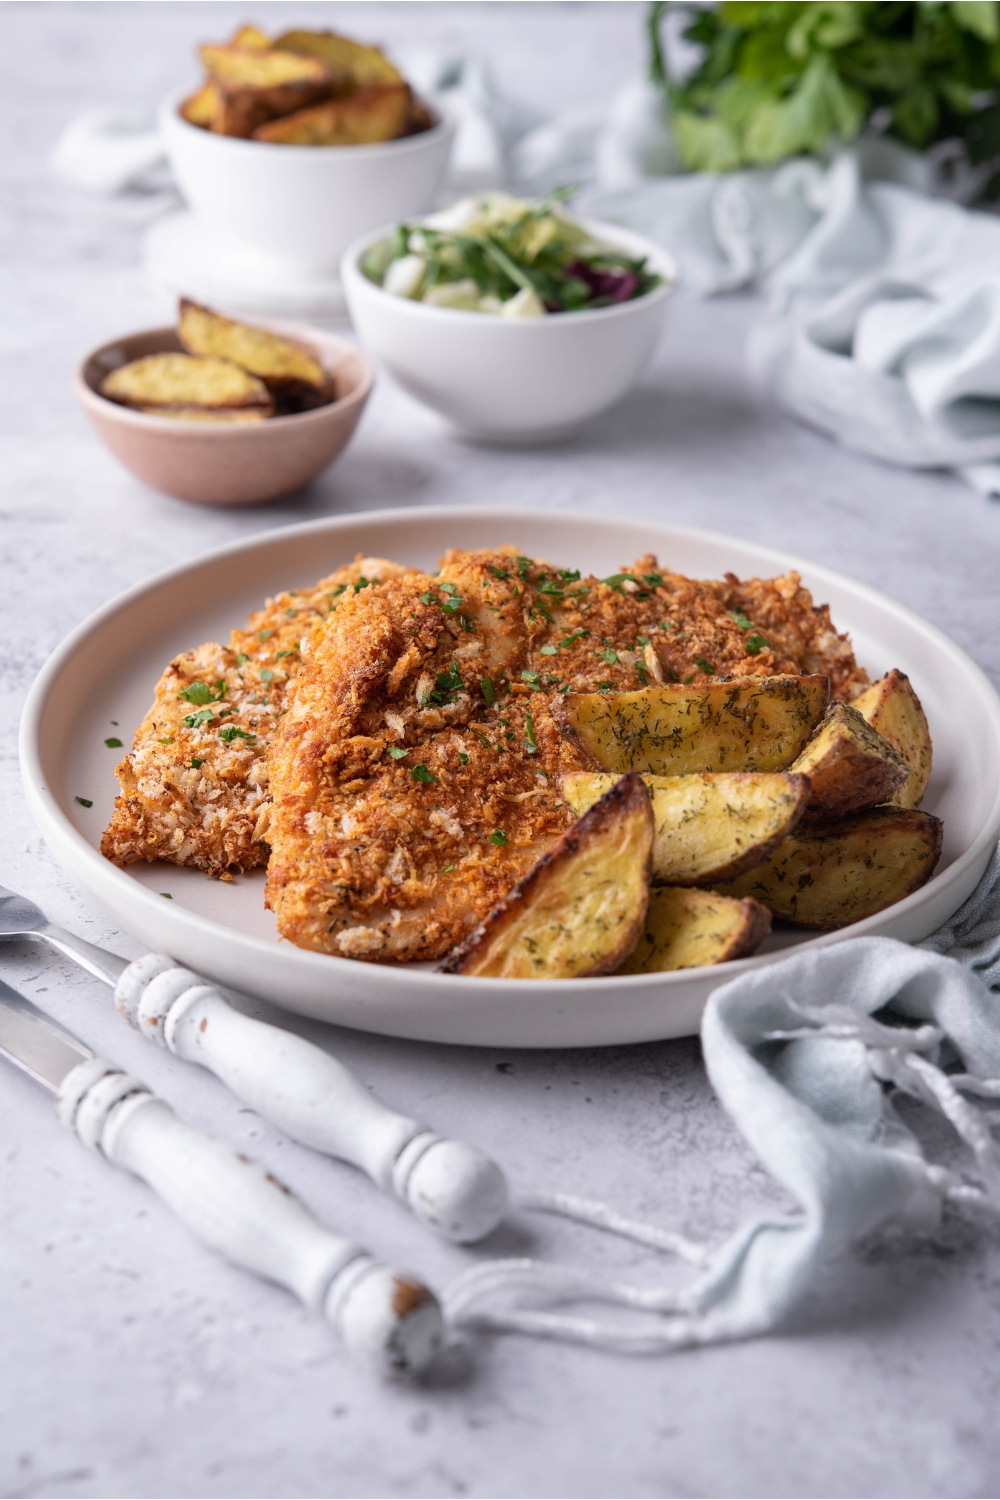 A plate of seasoned baked chicken cutlets garnished with fresh herbs and served with a side of potato wedges. There's a set of silverware next to the plate.